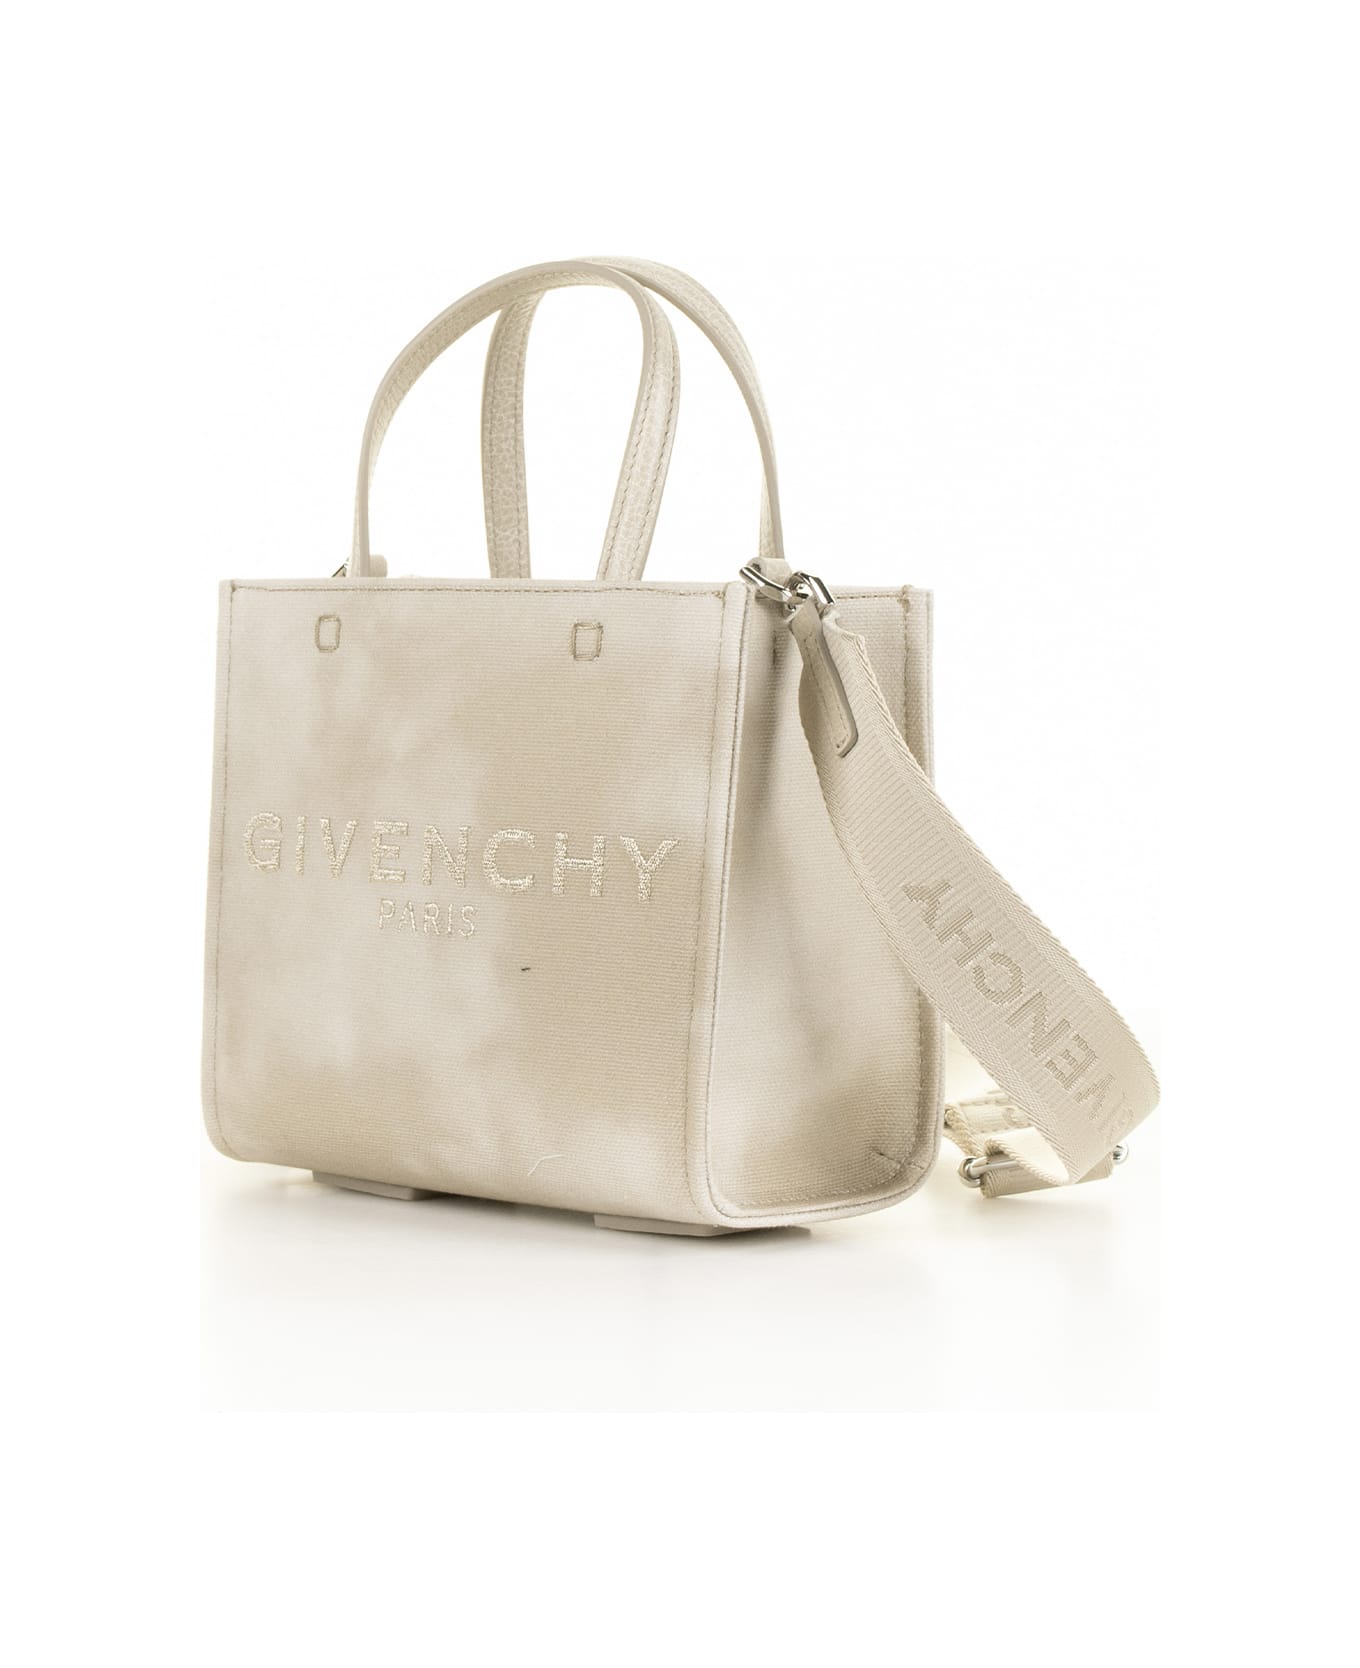 Givenchy Tote Bag In Canvas - dusty gold トートバッグ